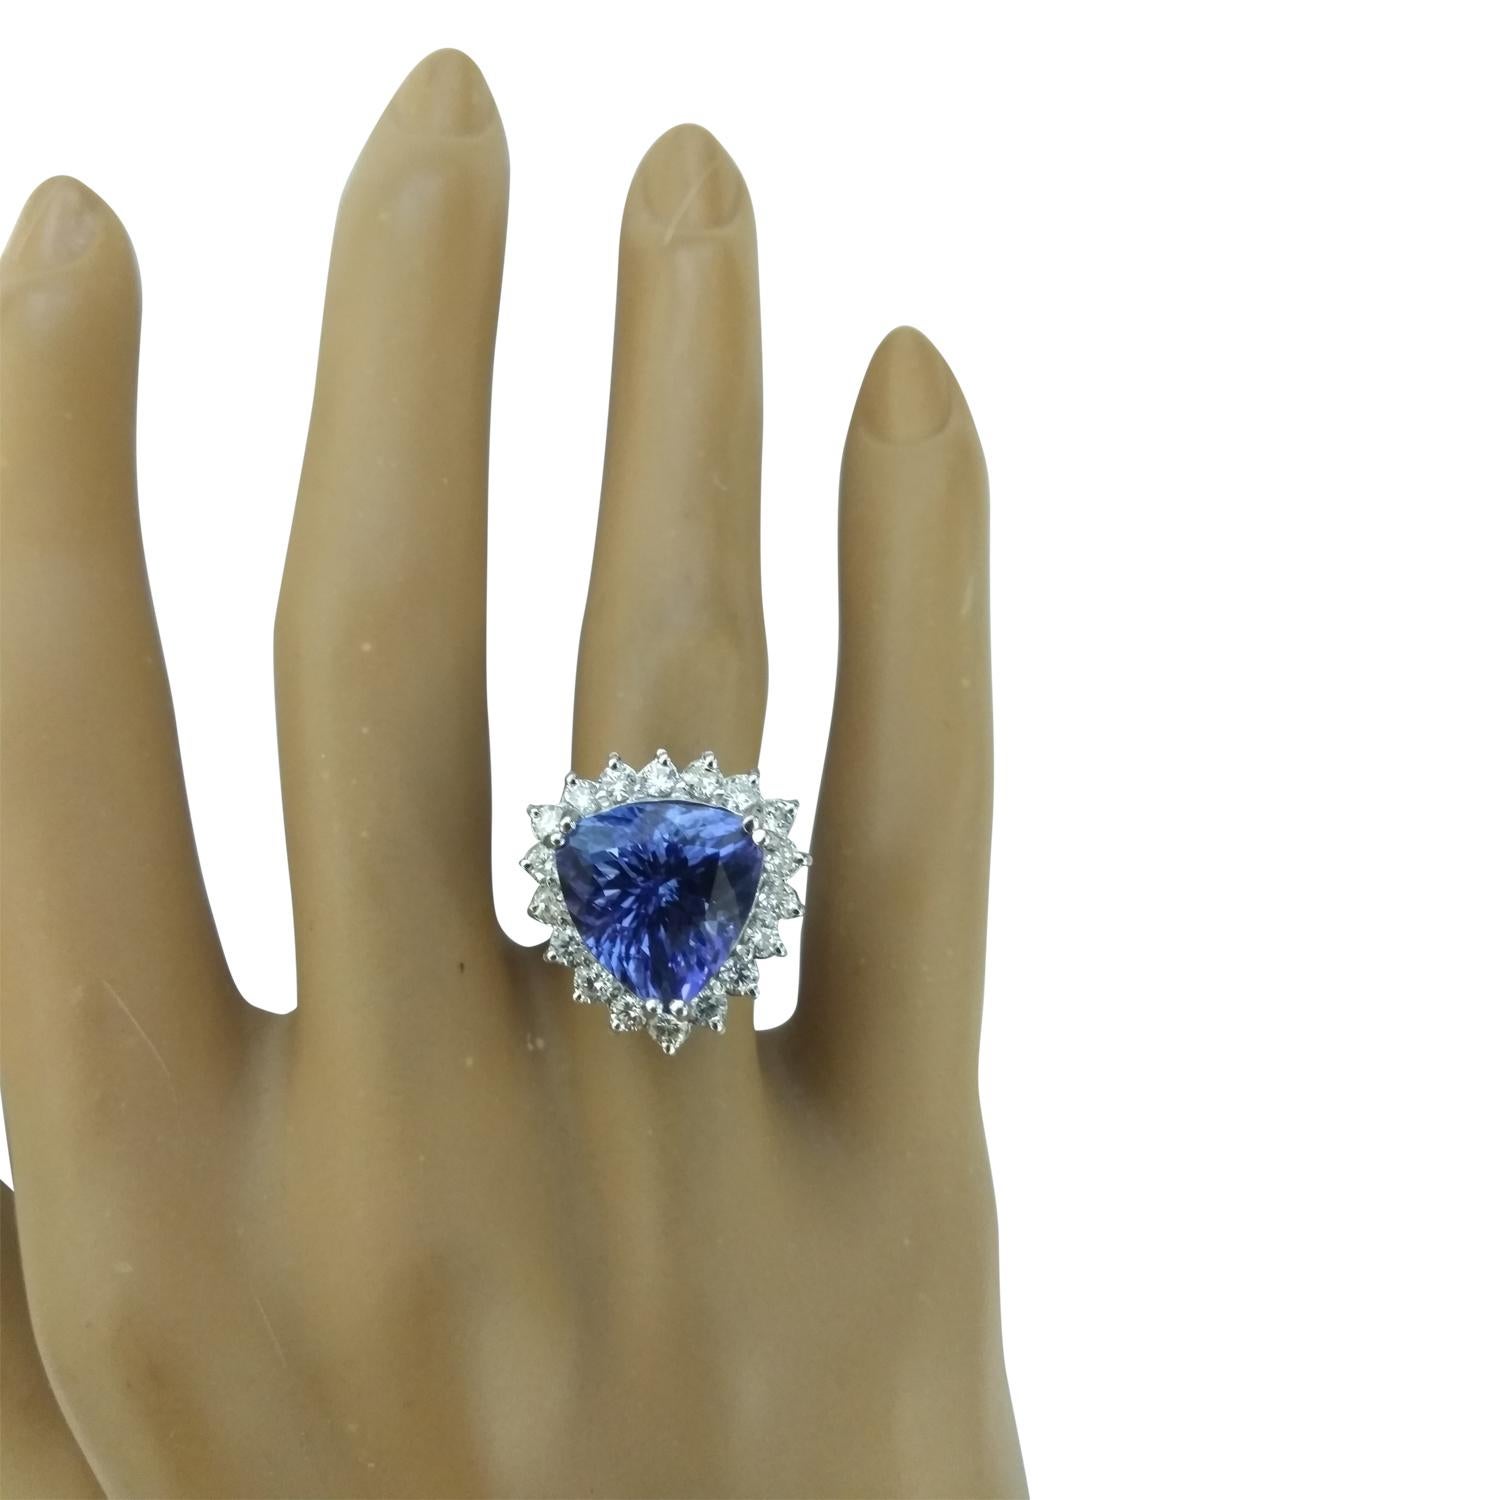 8.12 Carat Natural Tanzanite 14 Karat Solid White Gold Diamond Ring
Stamped: 14K 
Total Ring Weight: 5.1 Grams 
Tanzanite Weight 7.22 Carat (12.30x12.30 Millimeters)
Diamond Weight: 0.90 carat (F-G Color, VS2-SI1 Clarity )
Face Measures: 18.05x18.30